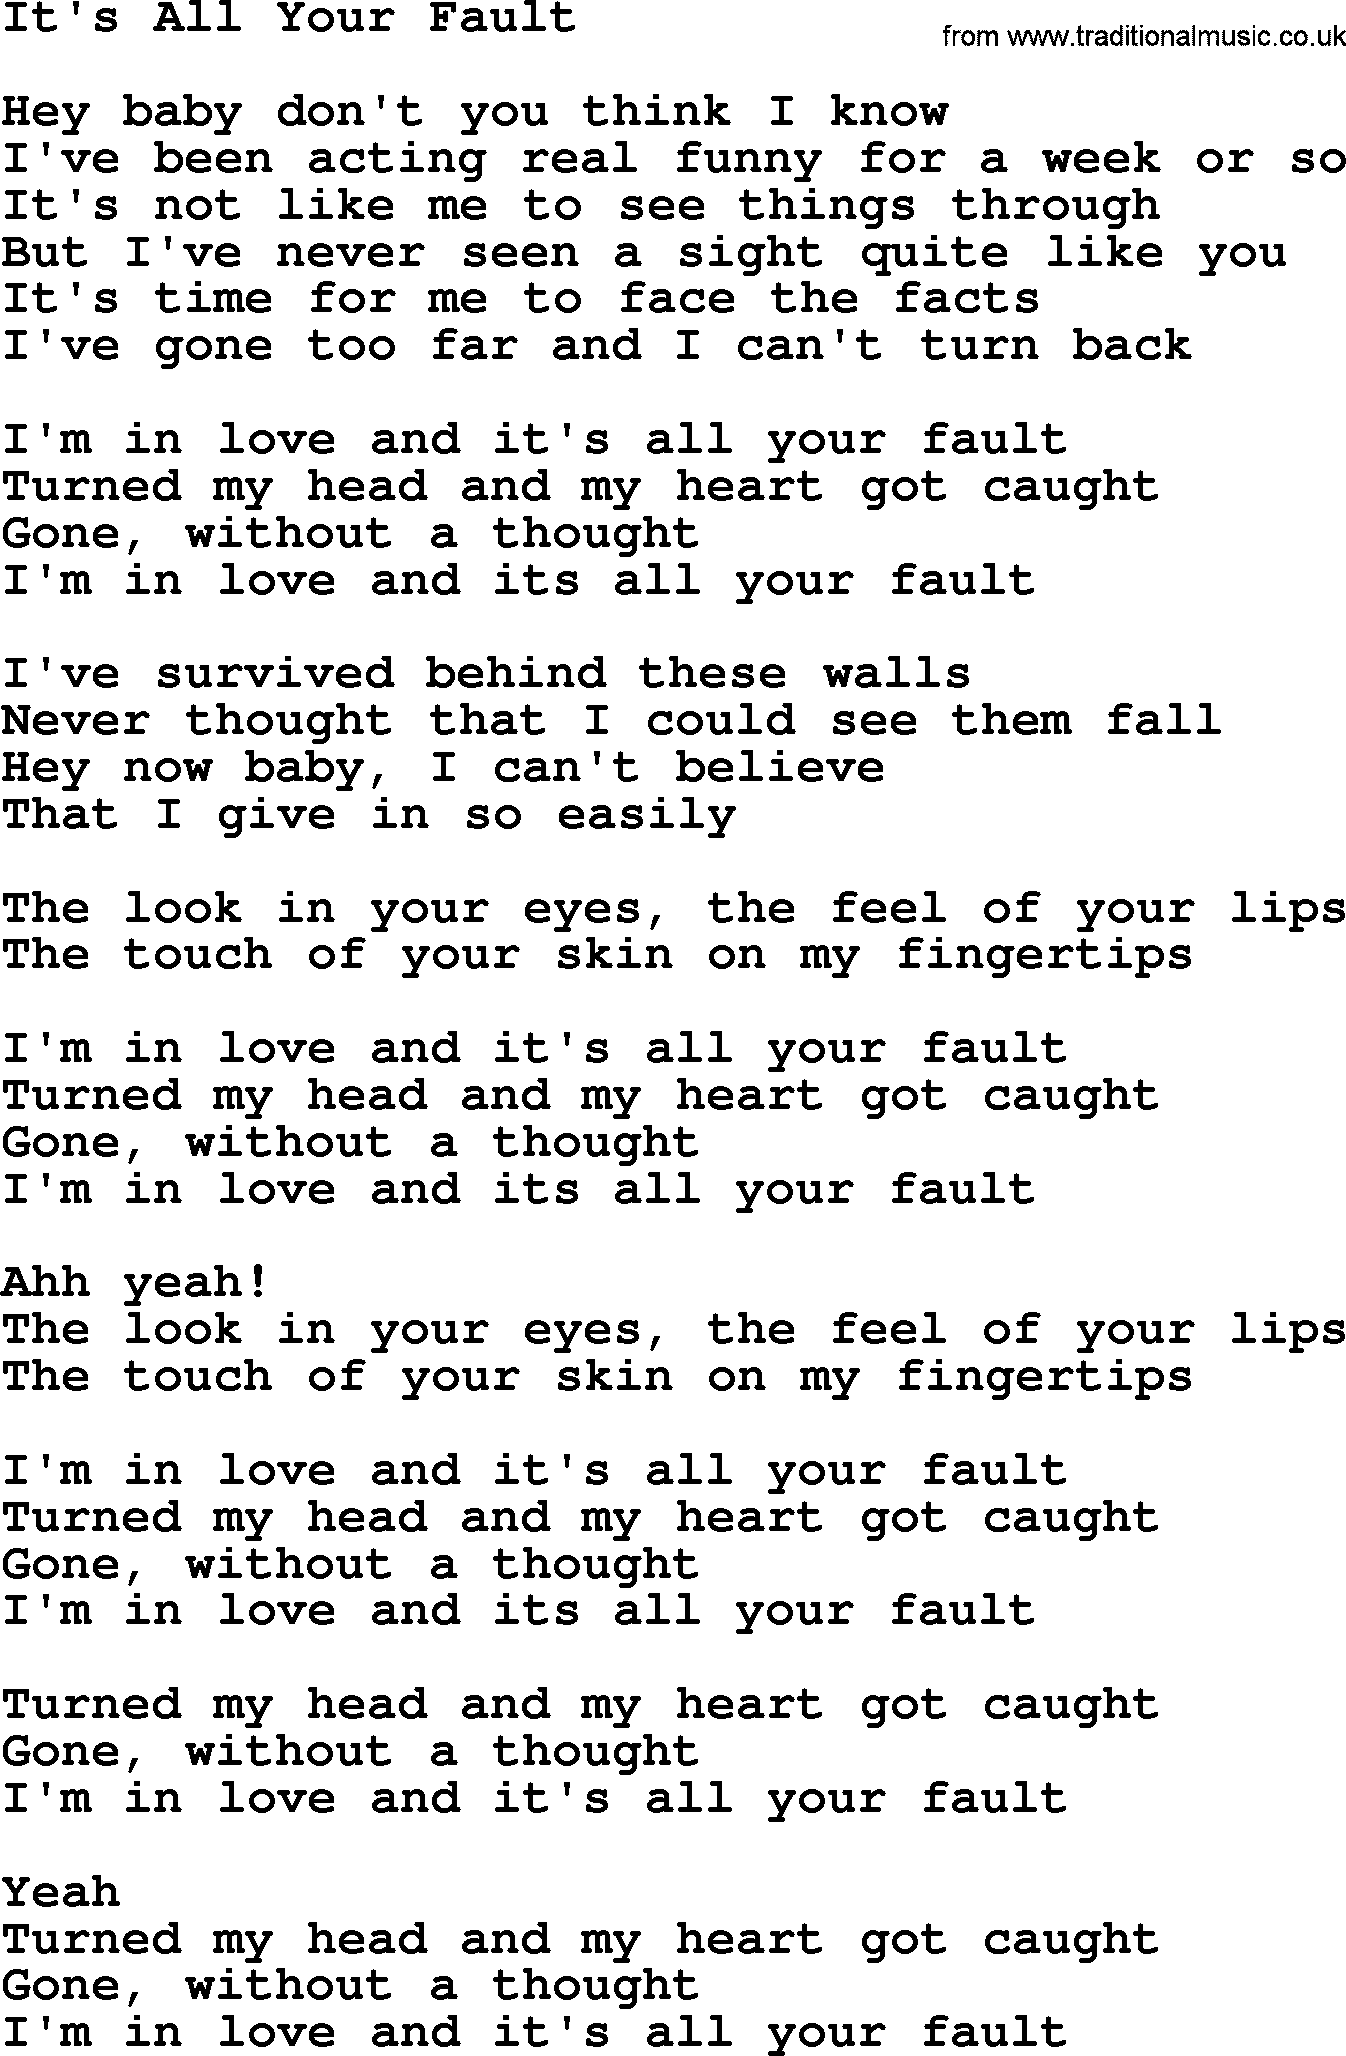 Willie Nelson song: It's All Your Fault lyrics